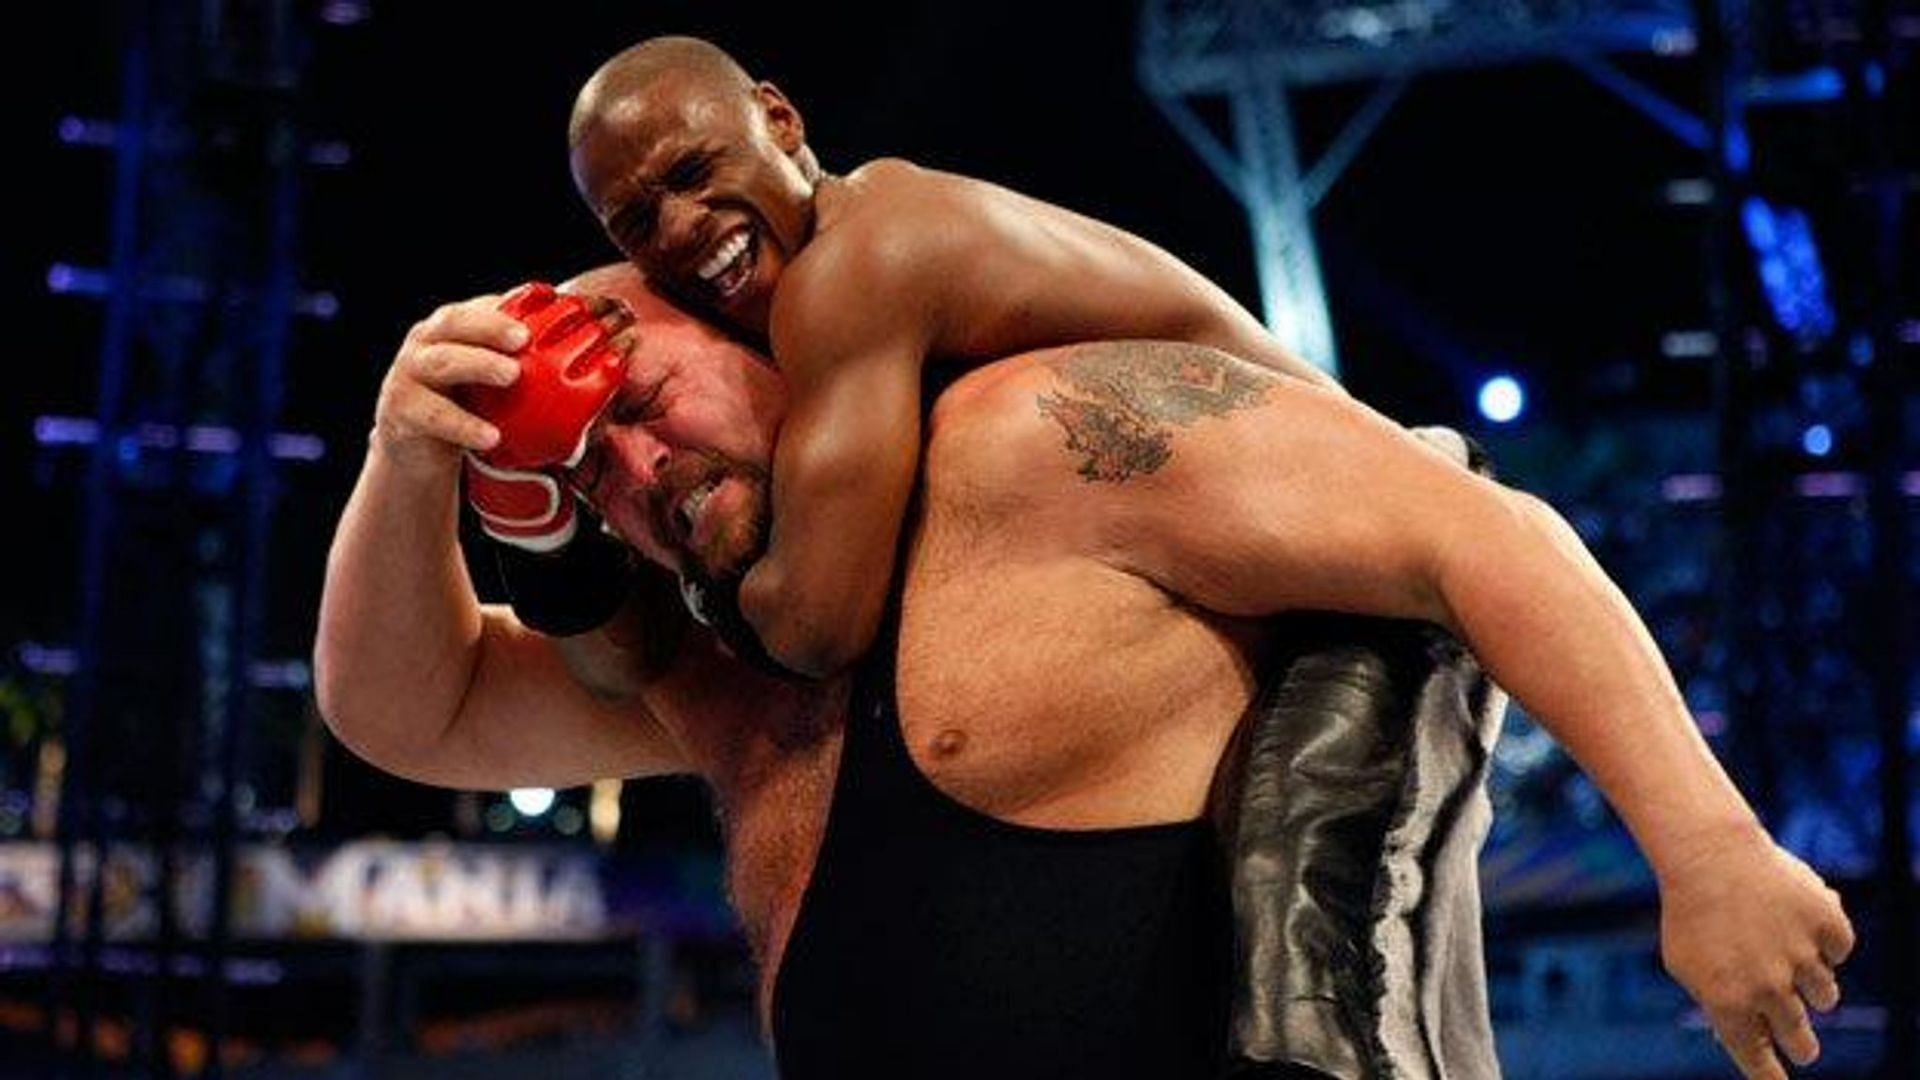 Floyd Mayweather and Paul Wight clashed in a true David vs. Goliath match